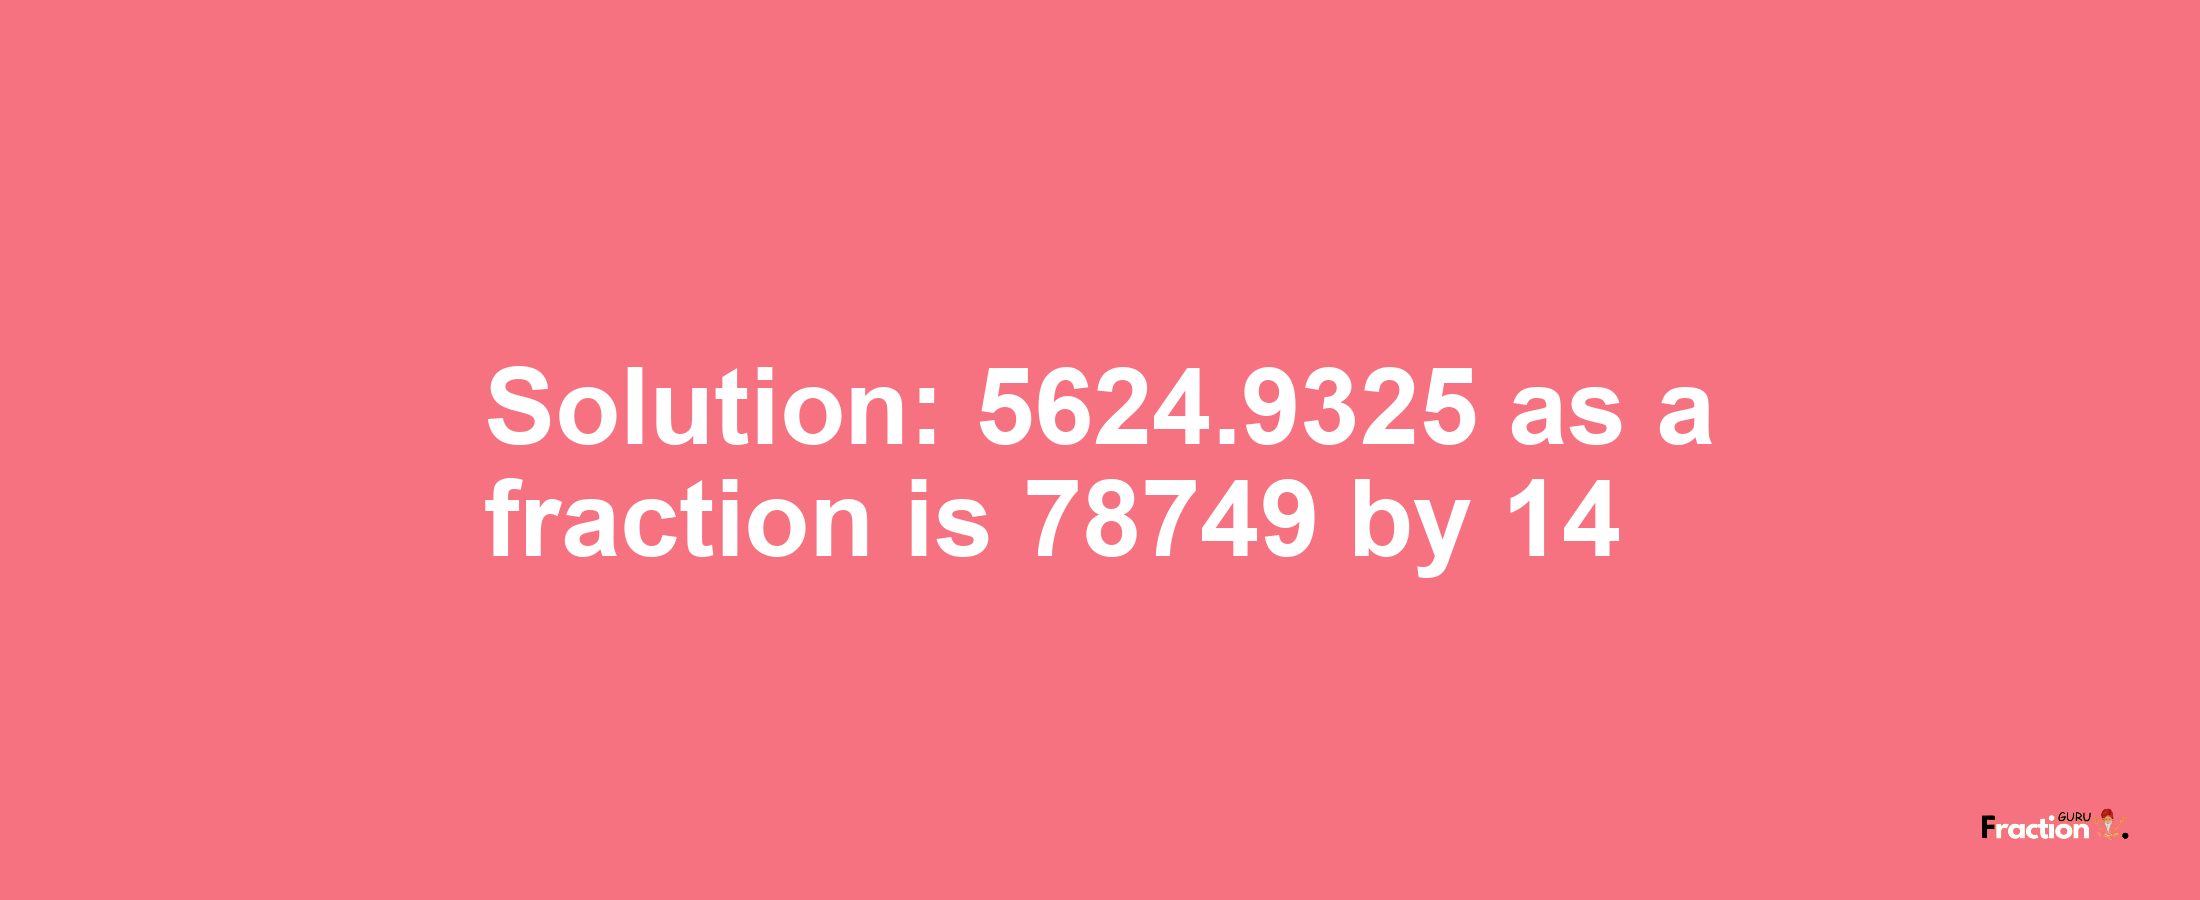 Solution:5624.9325 as a fraction is 78749/14